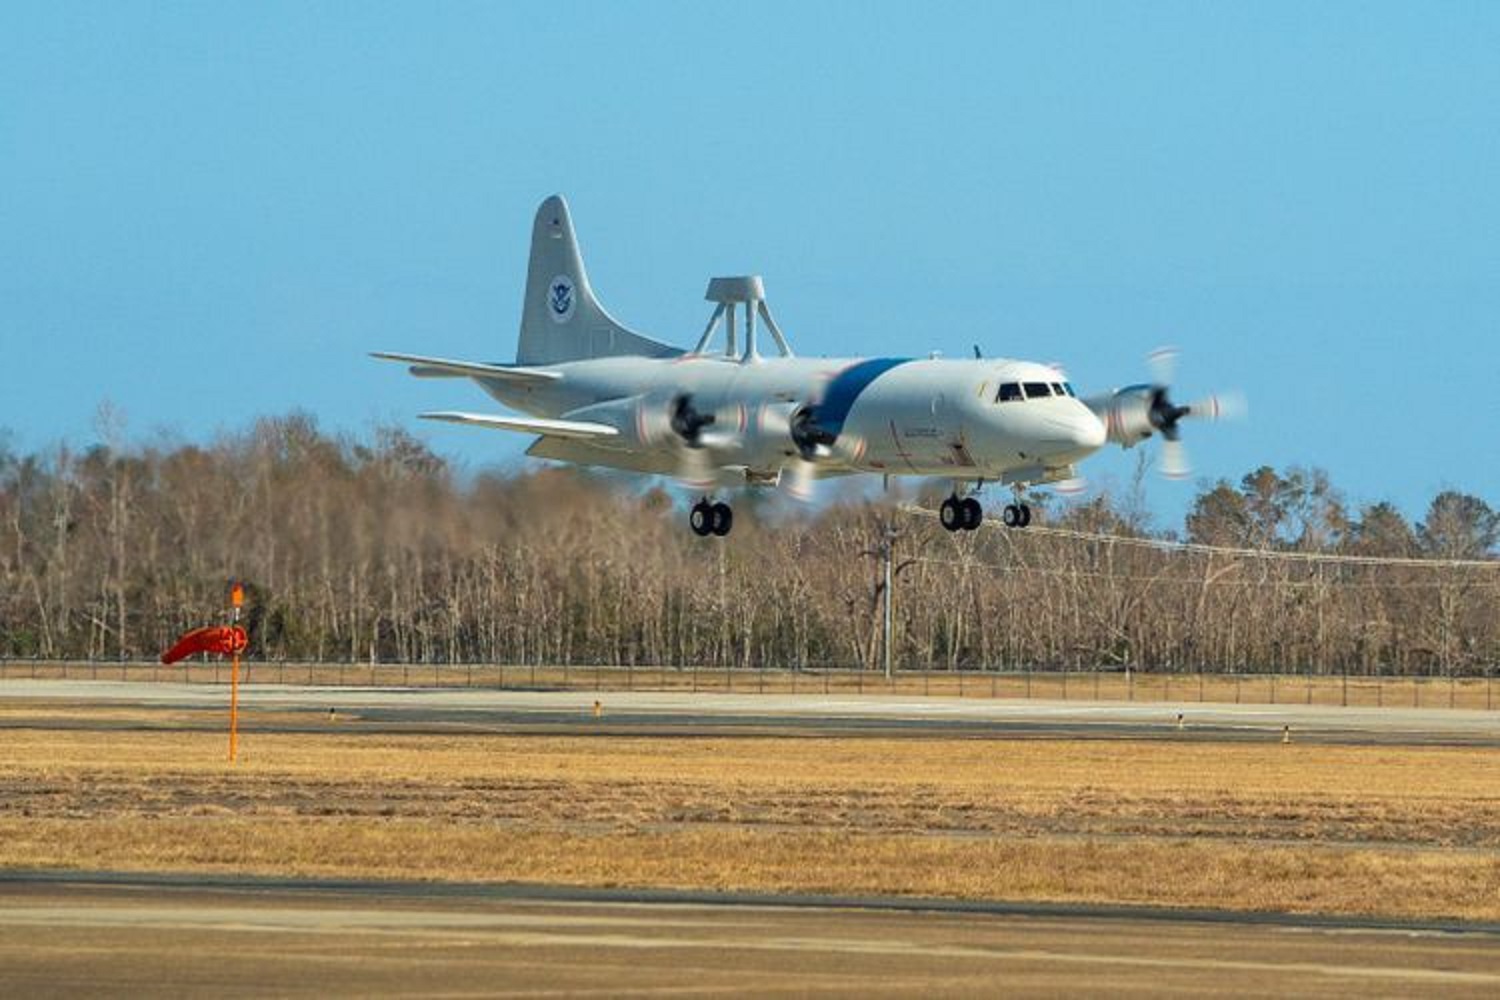 Northrop Grumman Inducts First US Customs and Border Protection P-3 Orion Maritime Patrol Aircraft